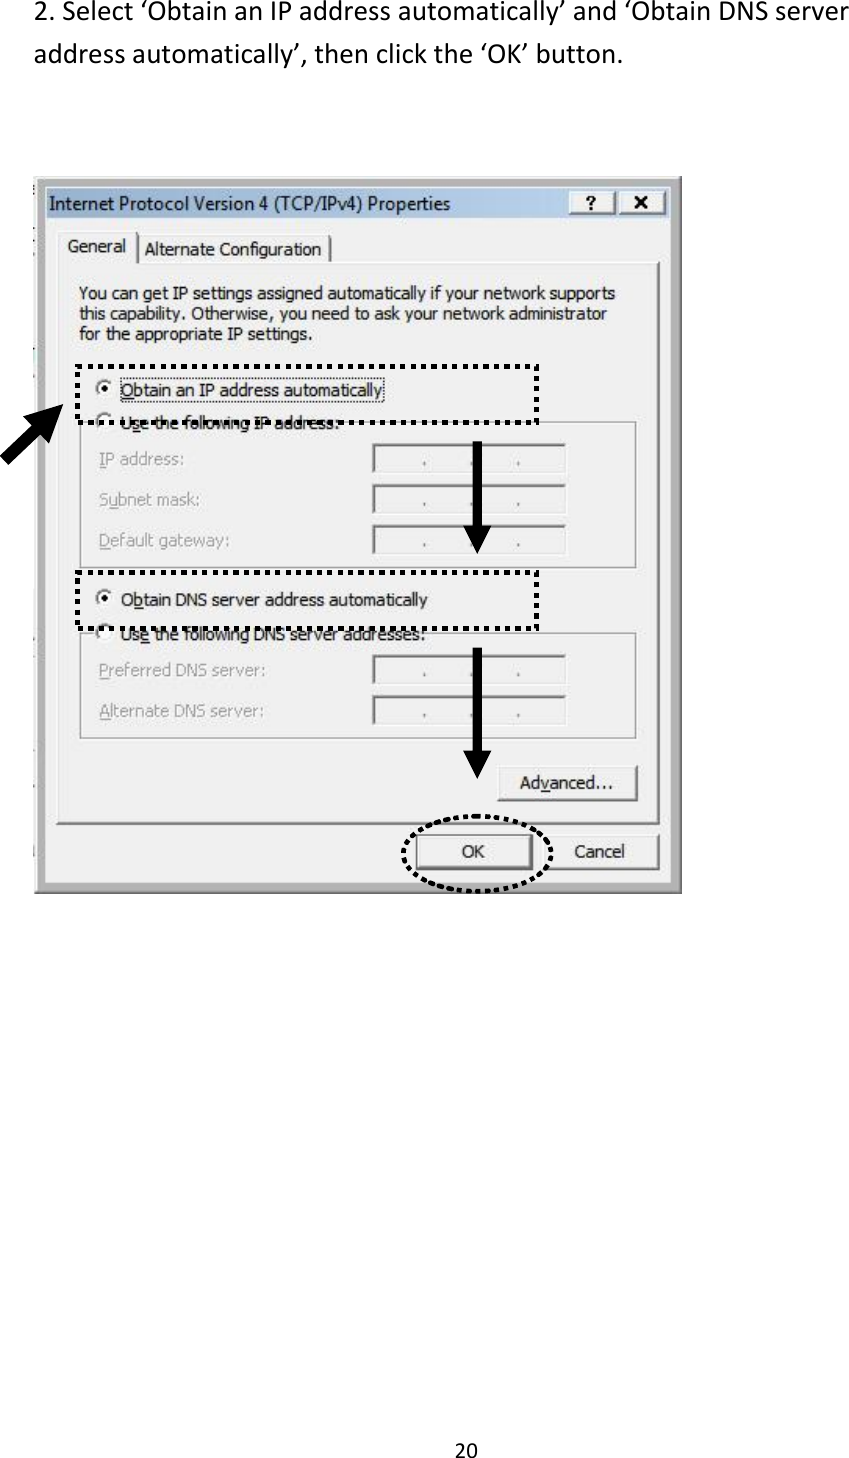 20 2. Select ‘Obtain an IP address automatically’ and ‘Obtain DNS server address automatically’, then click the ‘OK’ button.   